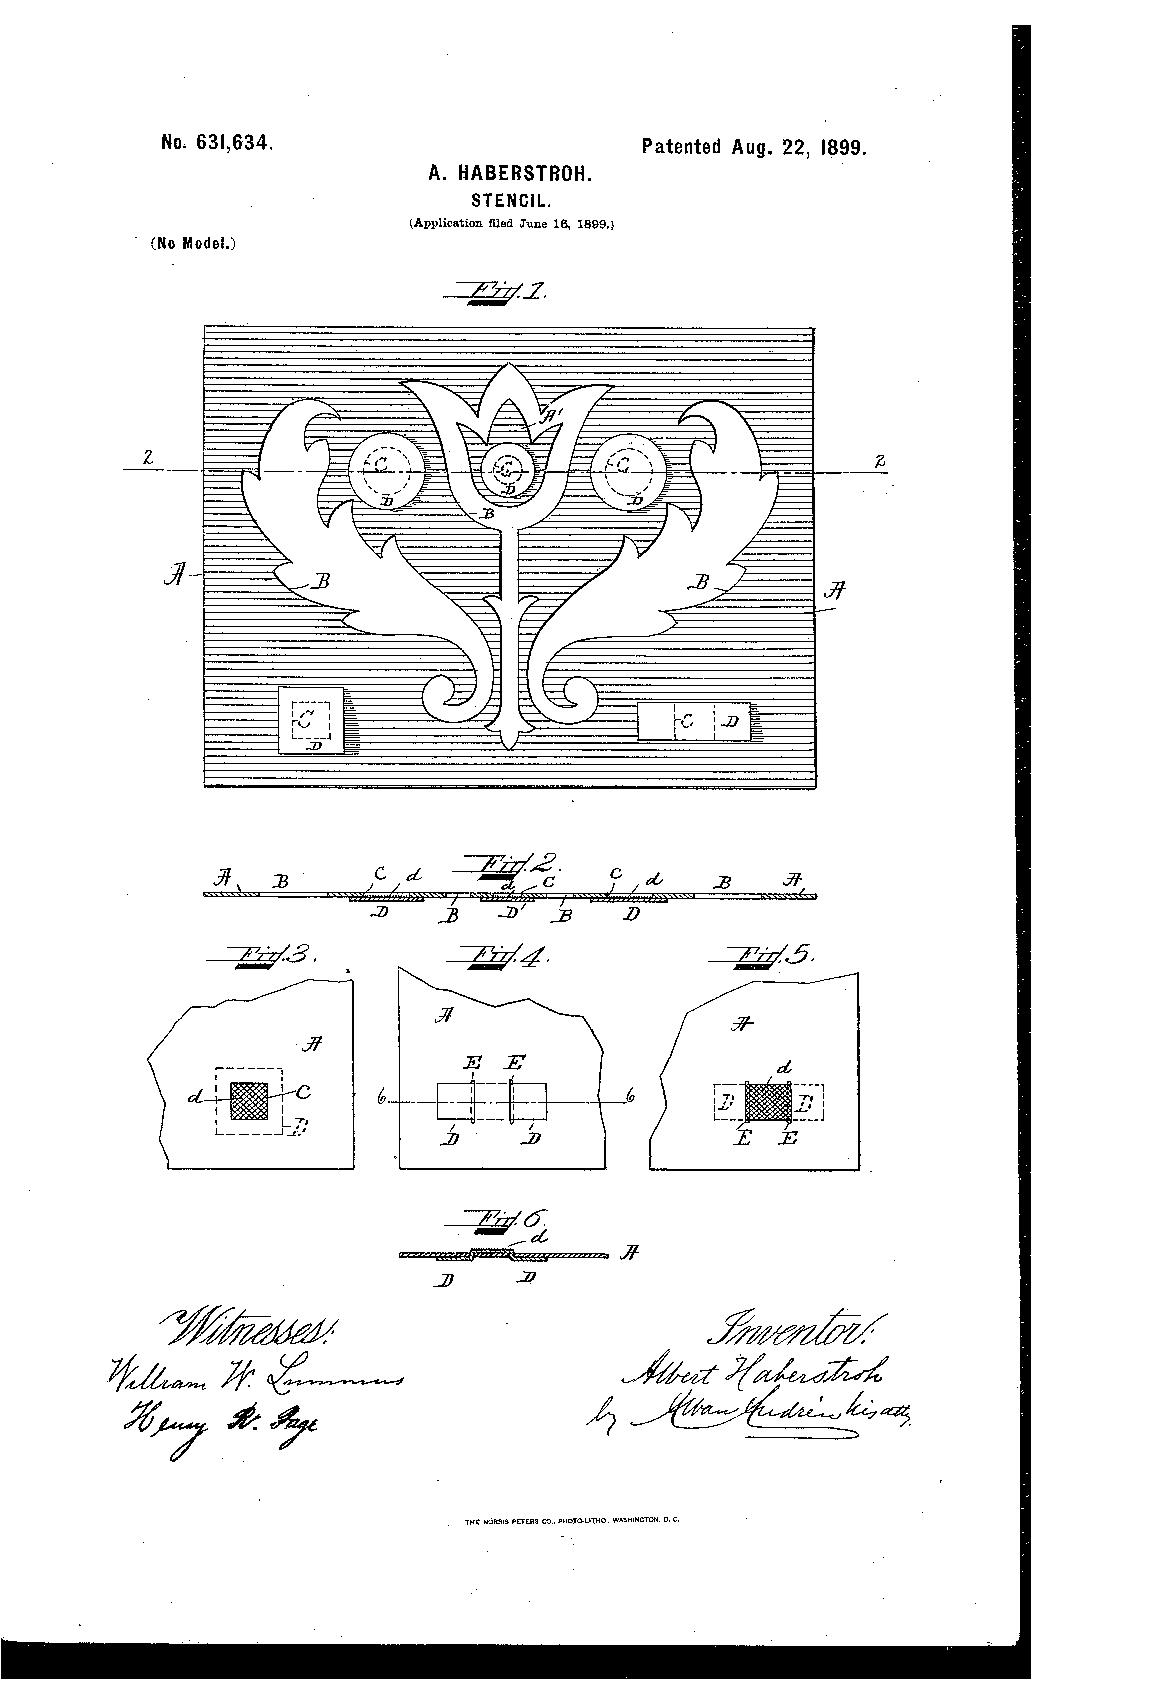 Patent for A. Haberstroh Stencil, patented Aug. 22, 1899. Black and white drawing of stencil pattern of a flower with notations and measurements.